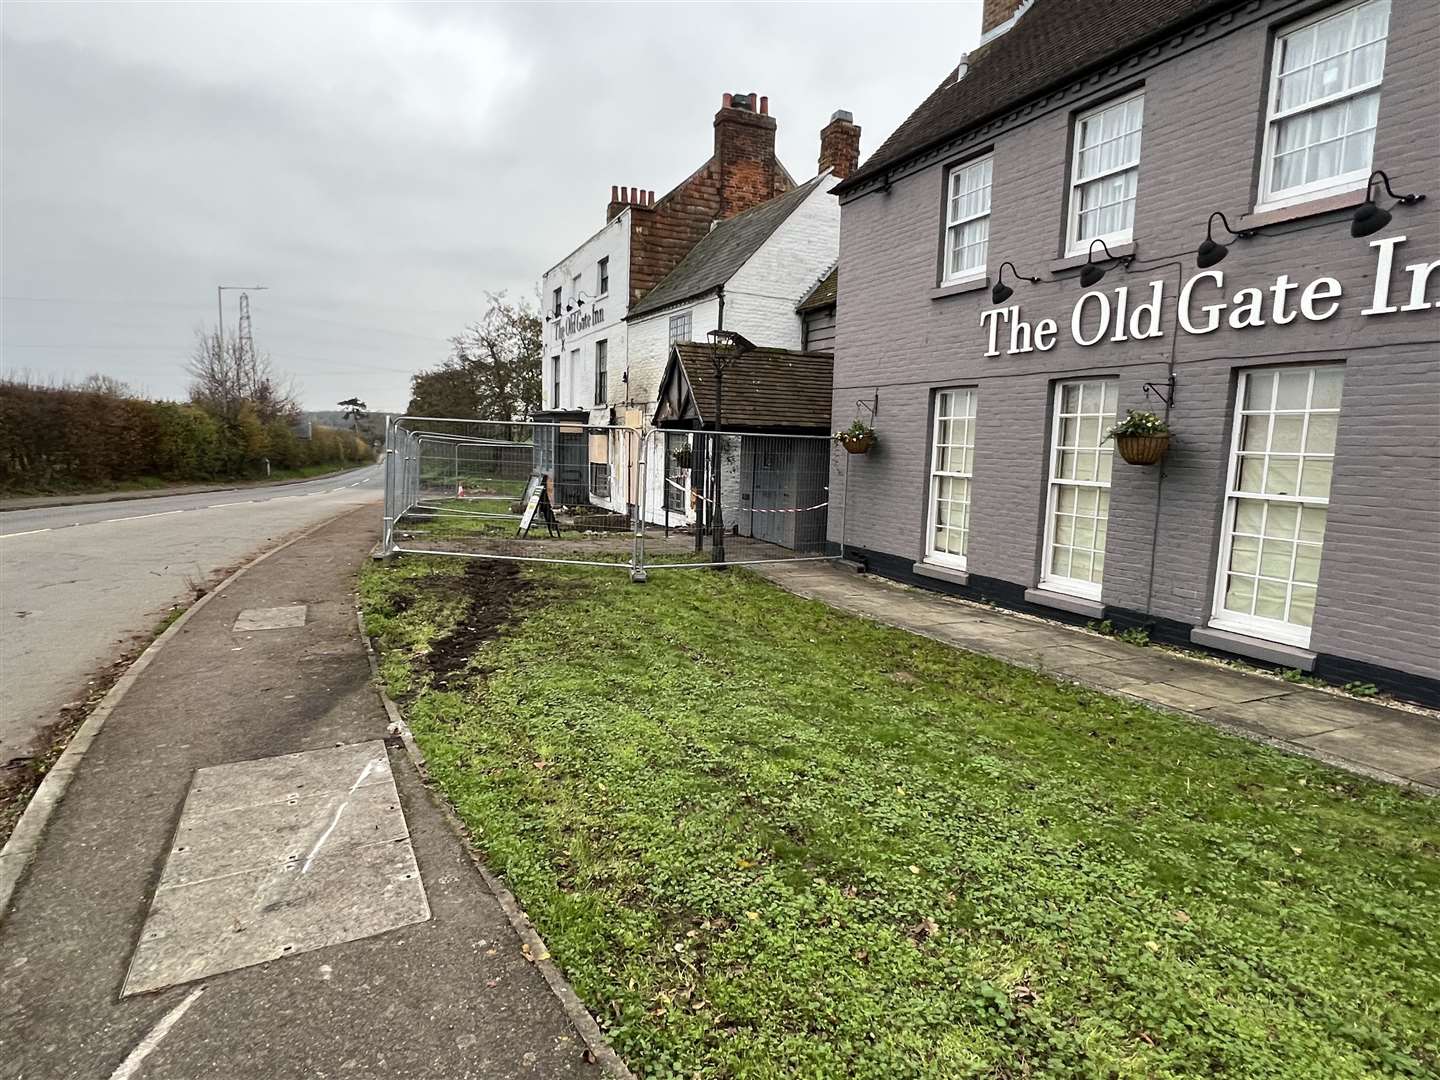 The scene of the crash at The Old Gate Inn, Canterbury. Picture: Barry Goodwin